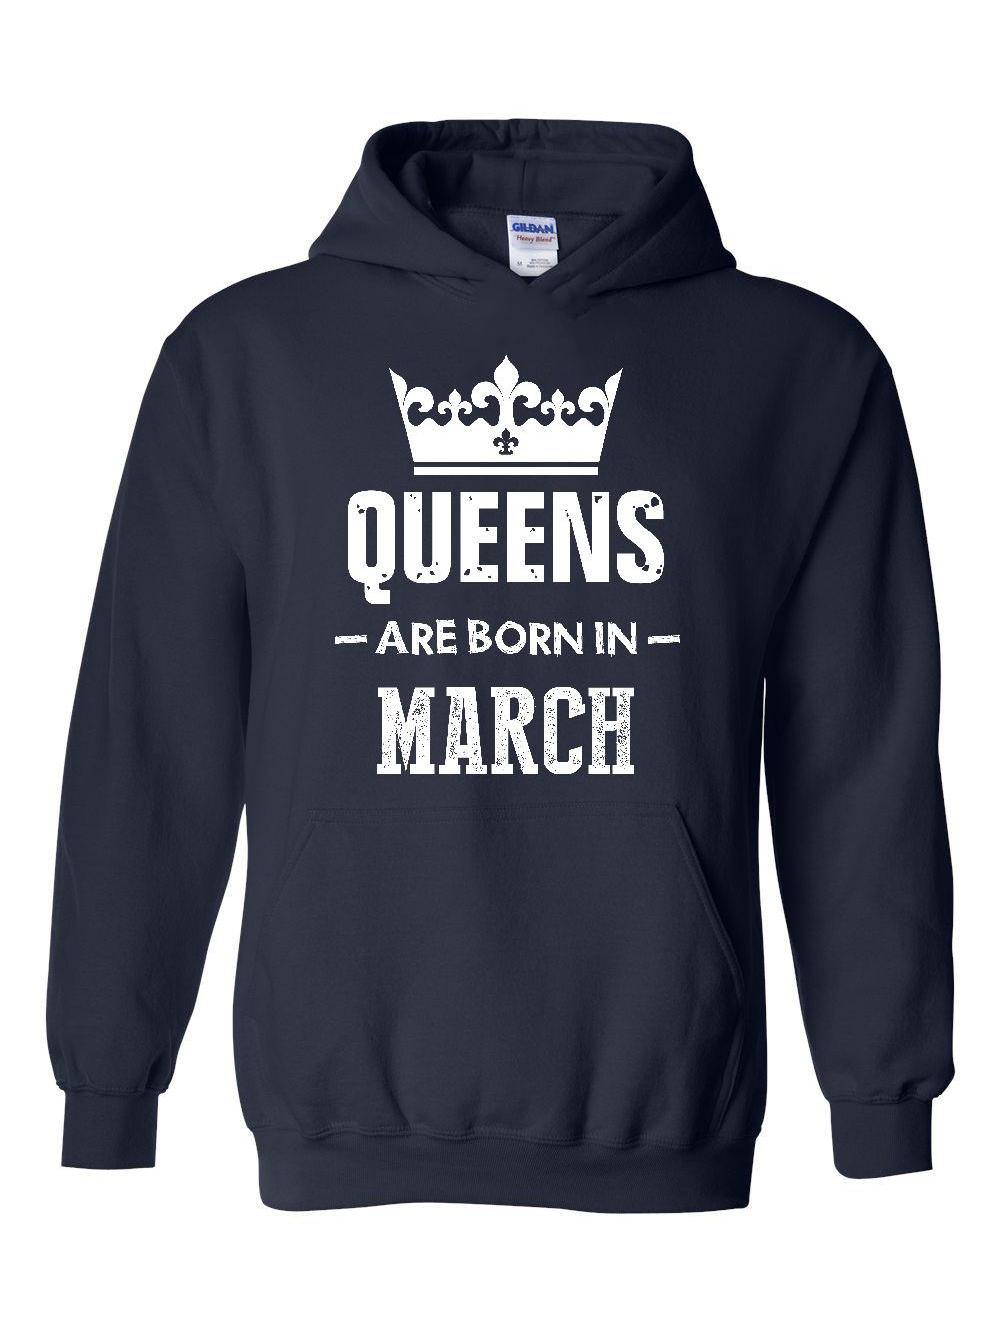 Birthday Gift Queens Are Born in March Hoodie Sweatshirt